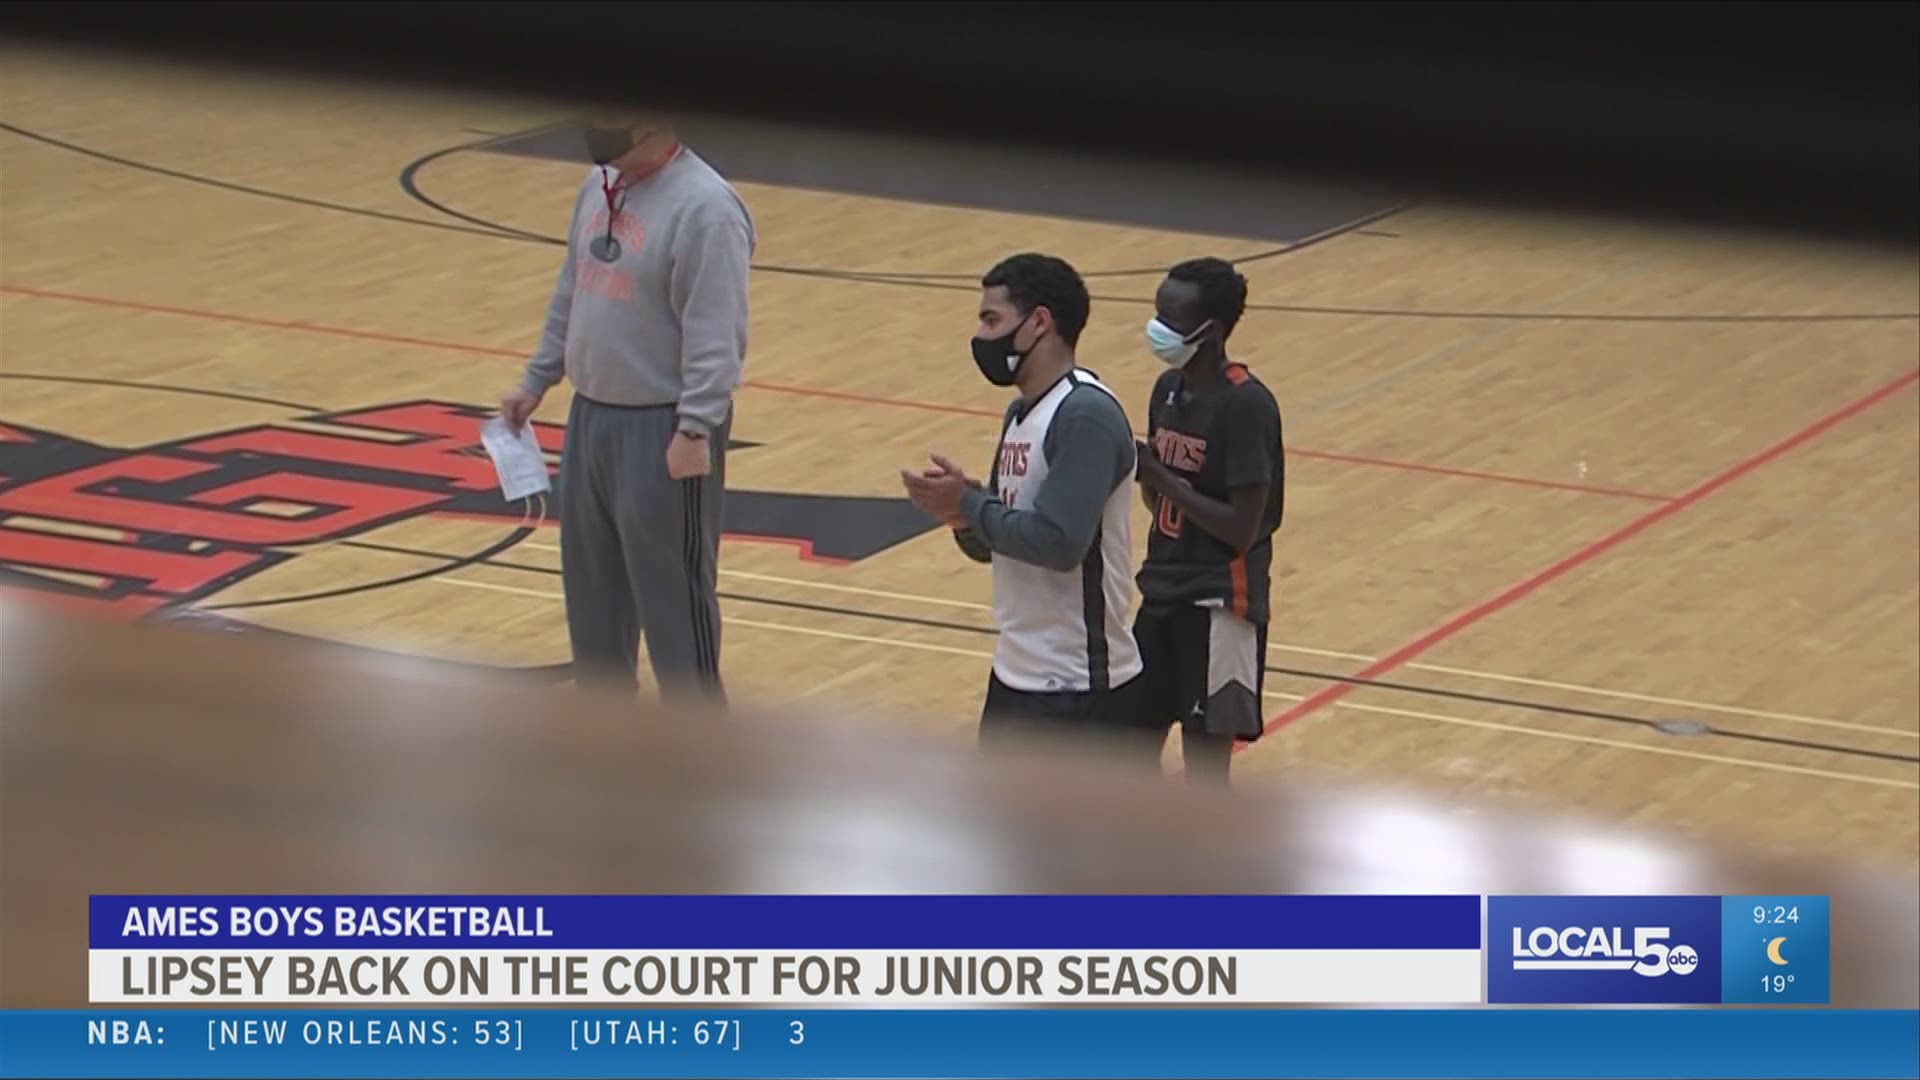 The Ames Junior is back on the floor after missing an entire season.